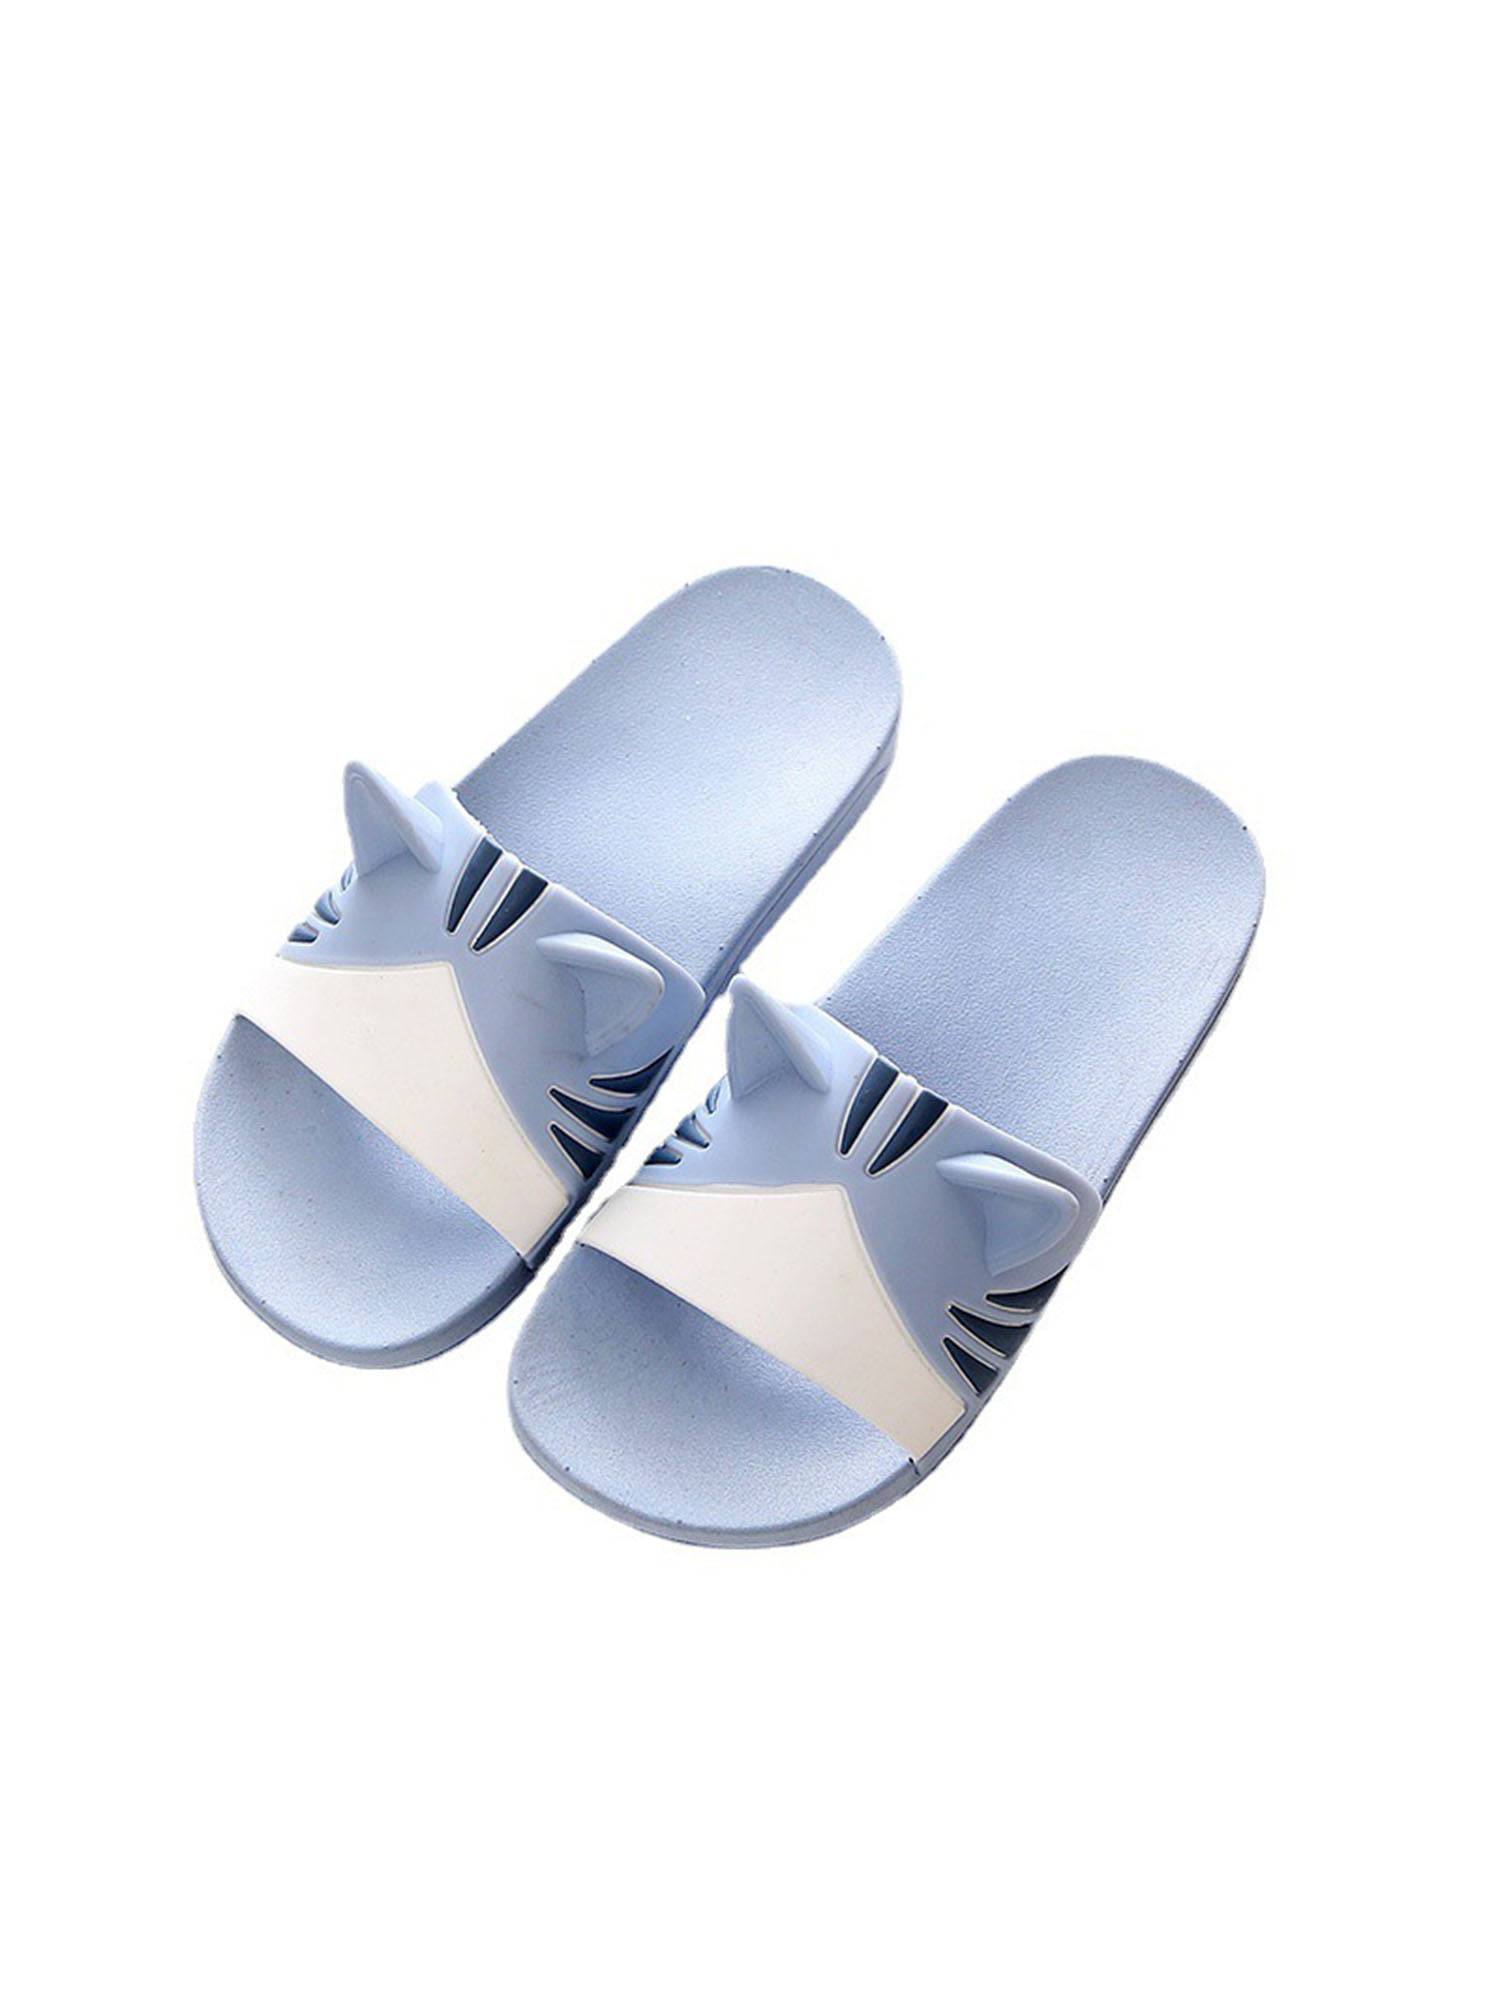 Women Slippers Slidess Solid Hollow Out Women Slides Classic H Slippers Non-Slip,Silver,6